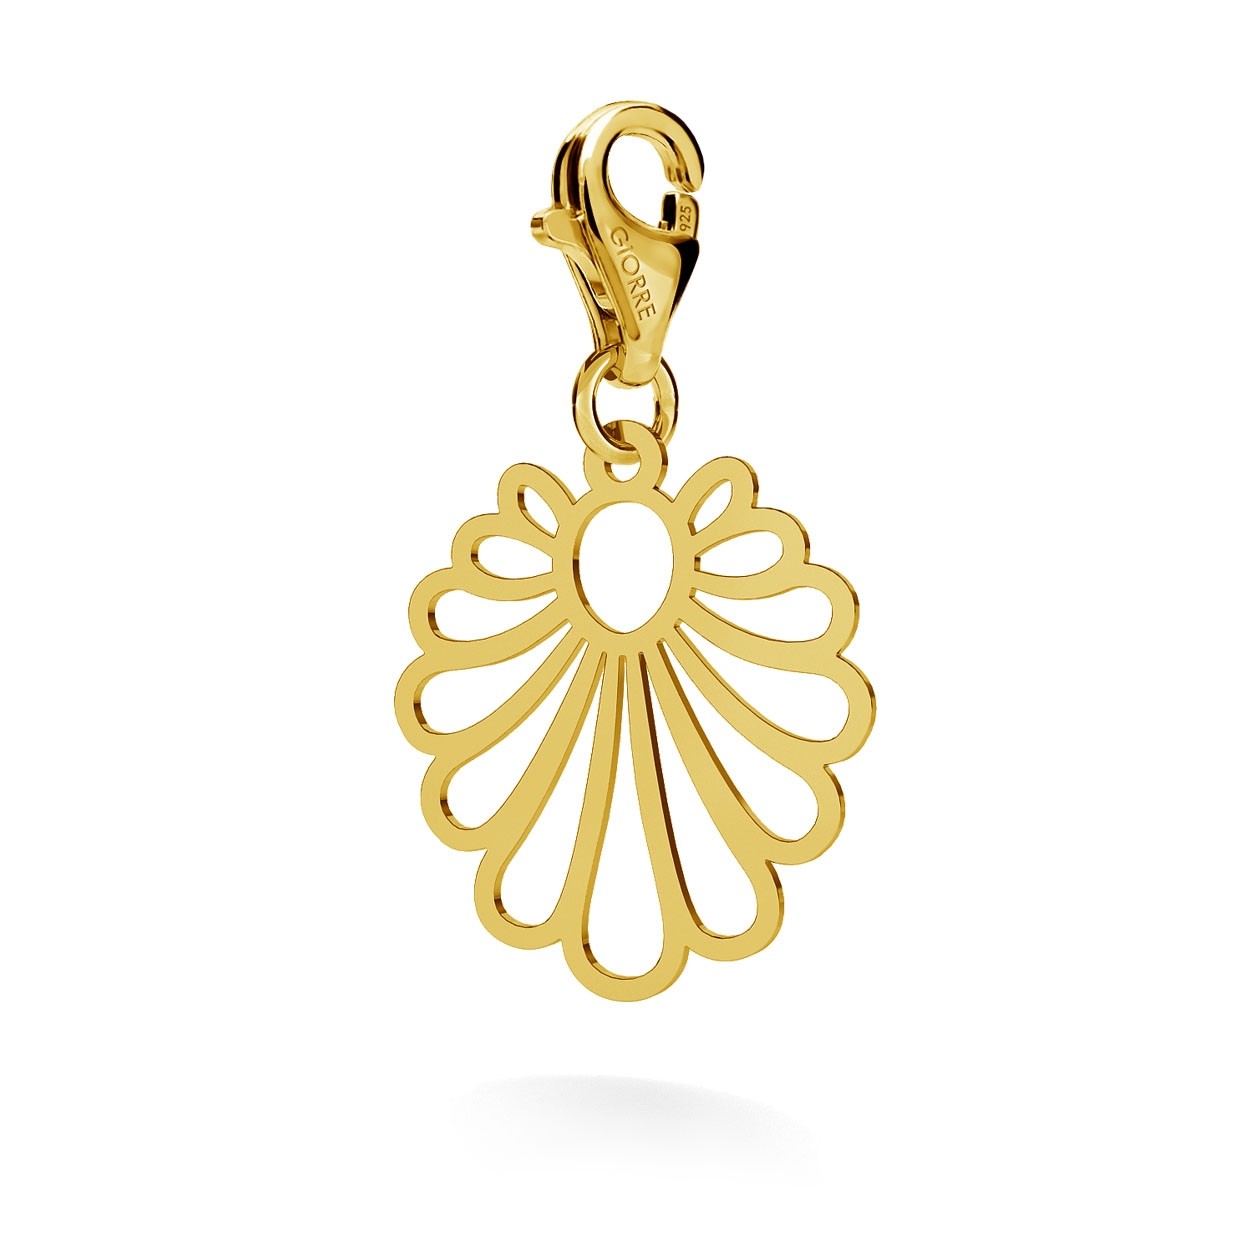 CHARM 62, ROSSETE DROP, SILVER 925, RHODIUM OR GOLD PLATED